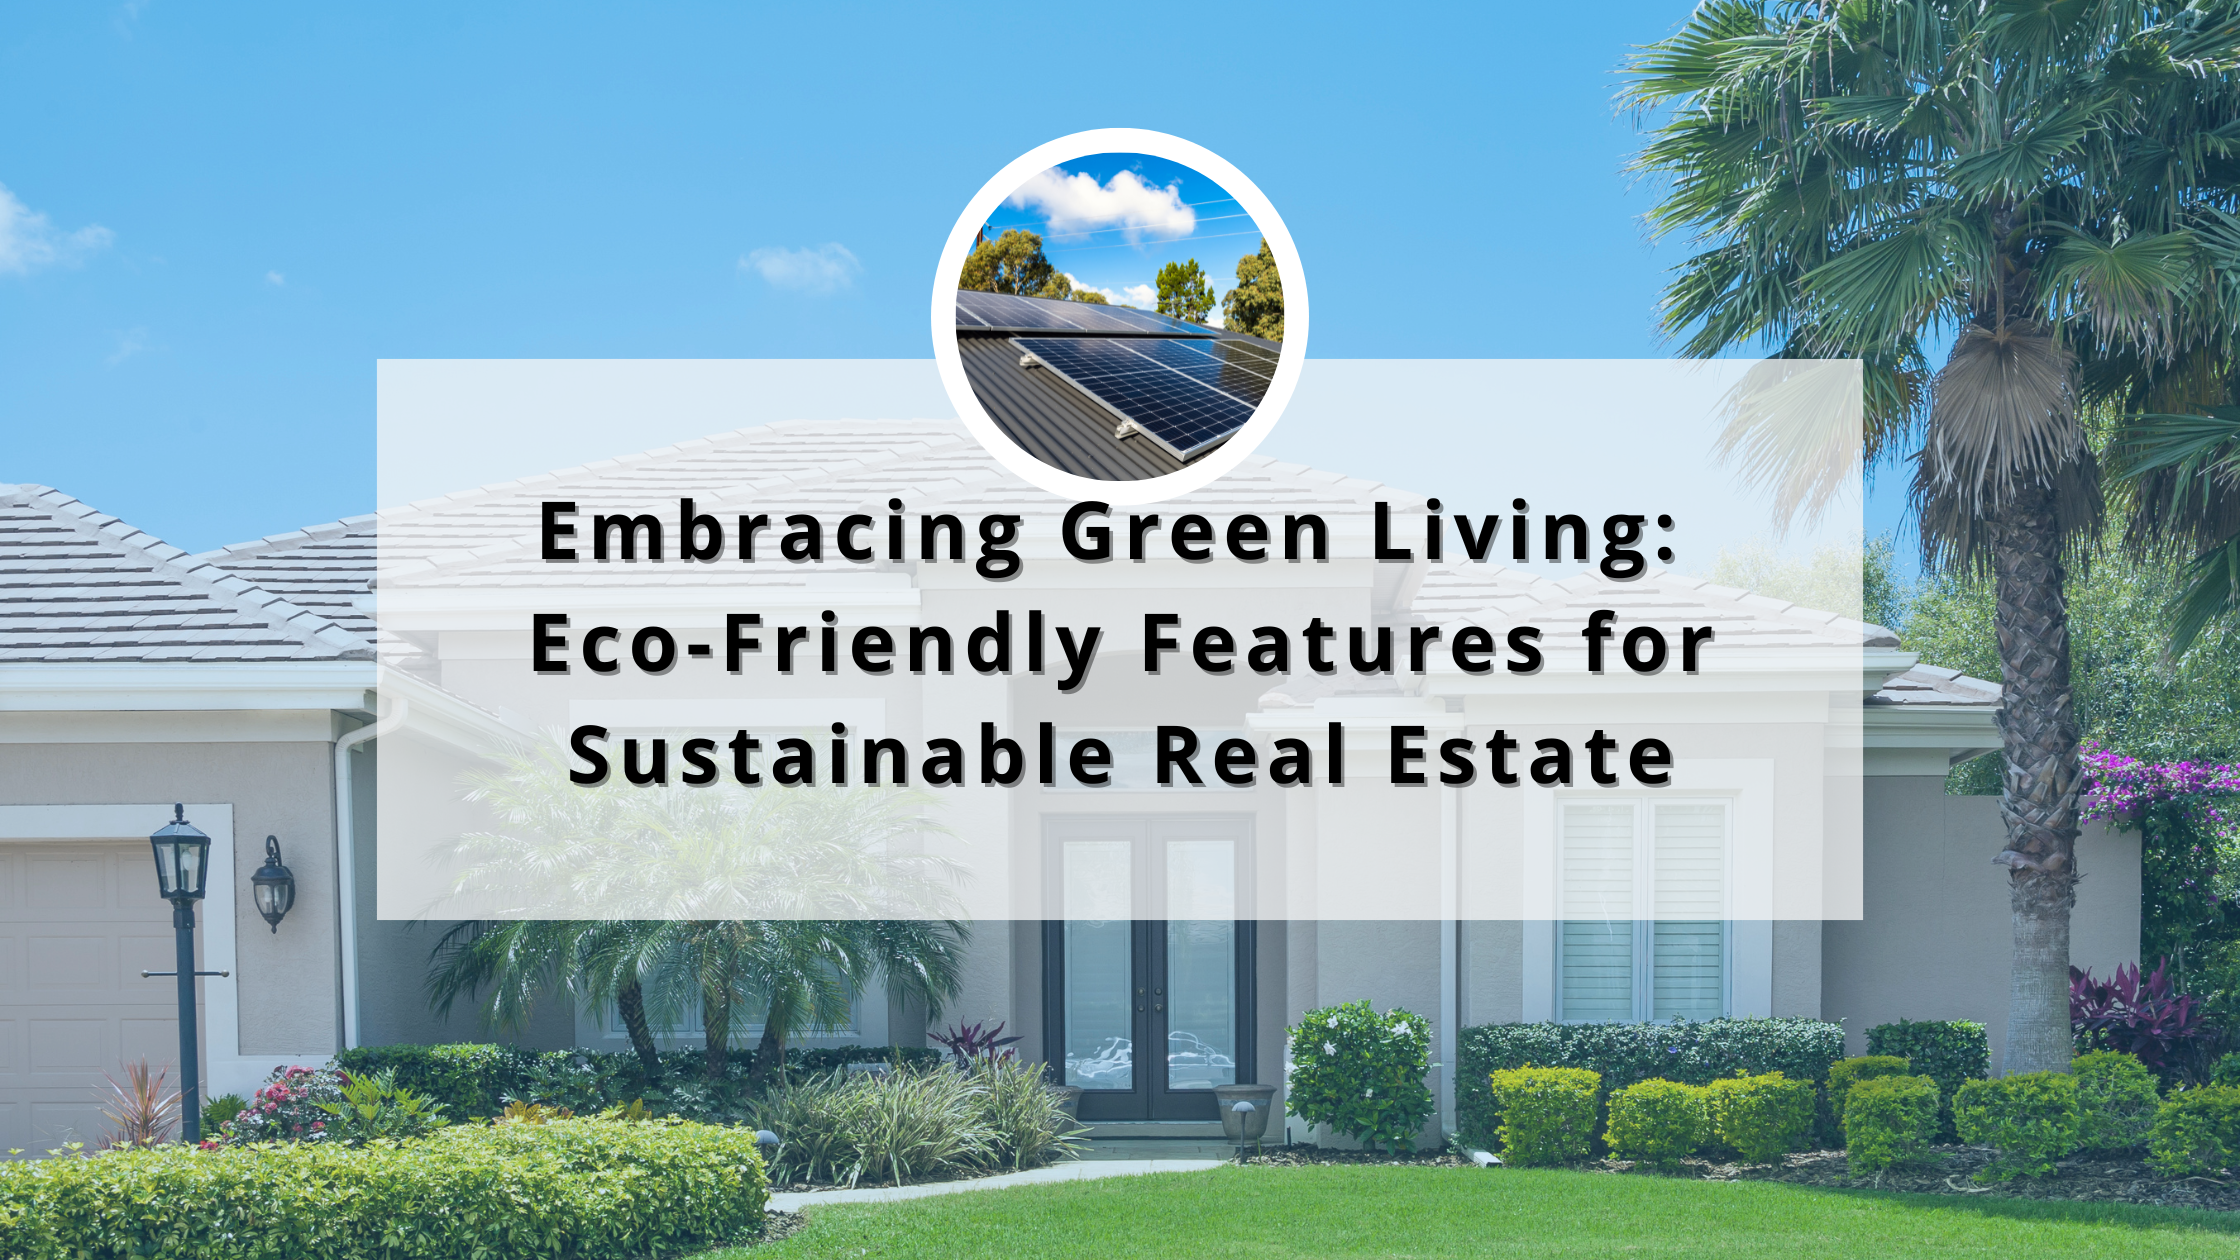 Embracing Green Living Eco-Friendly Features for Sustainable Real Estate